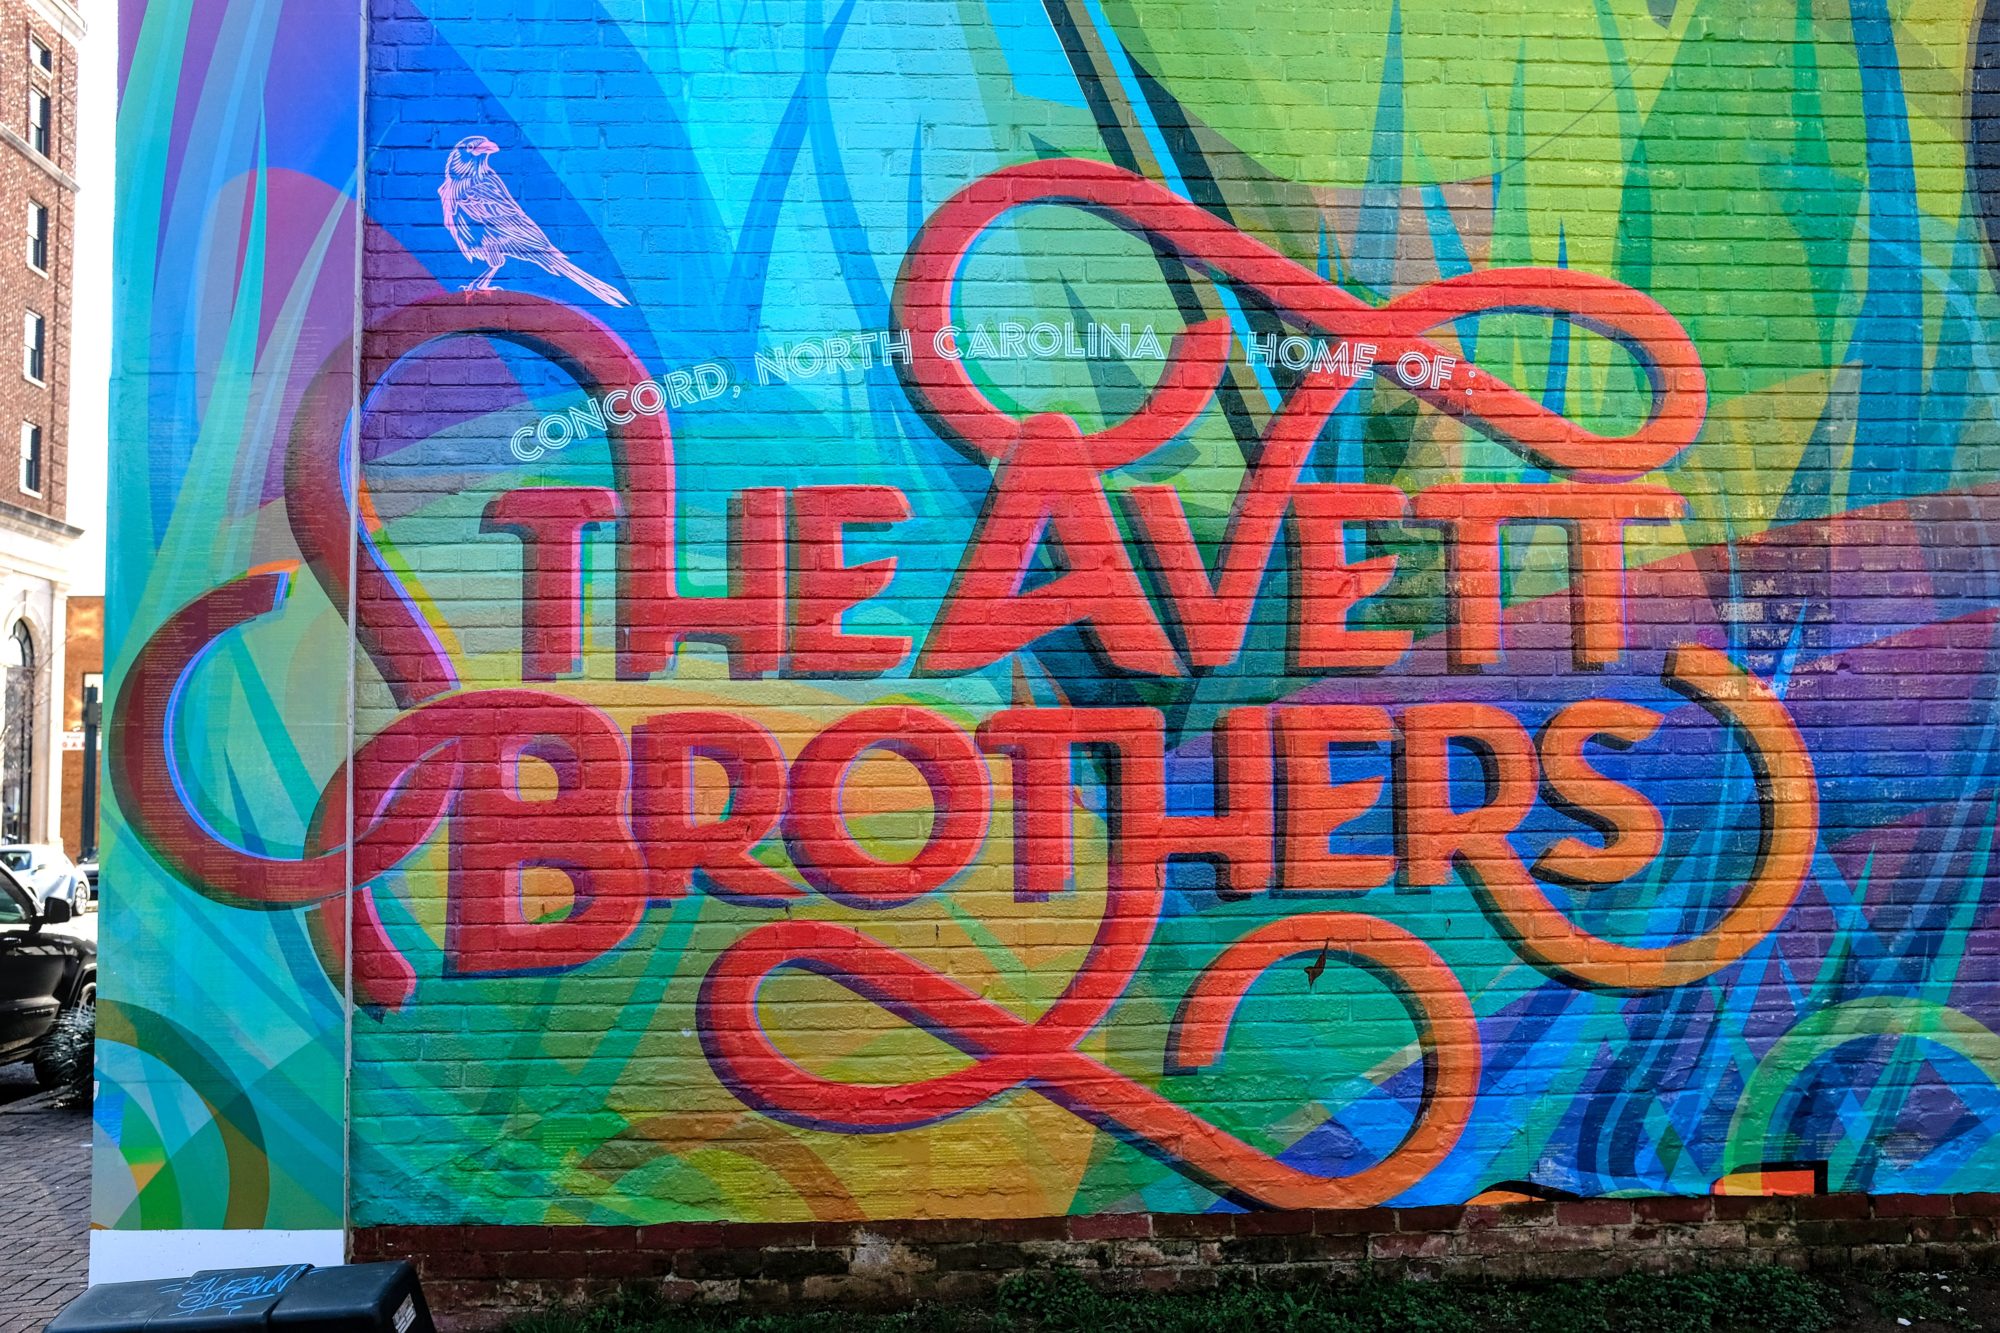 Closeup of The Avett Brothers mural in downtown Concord